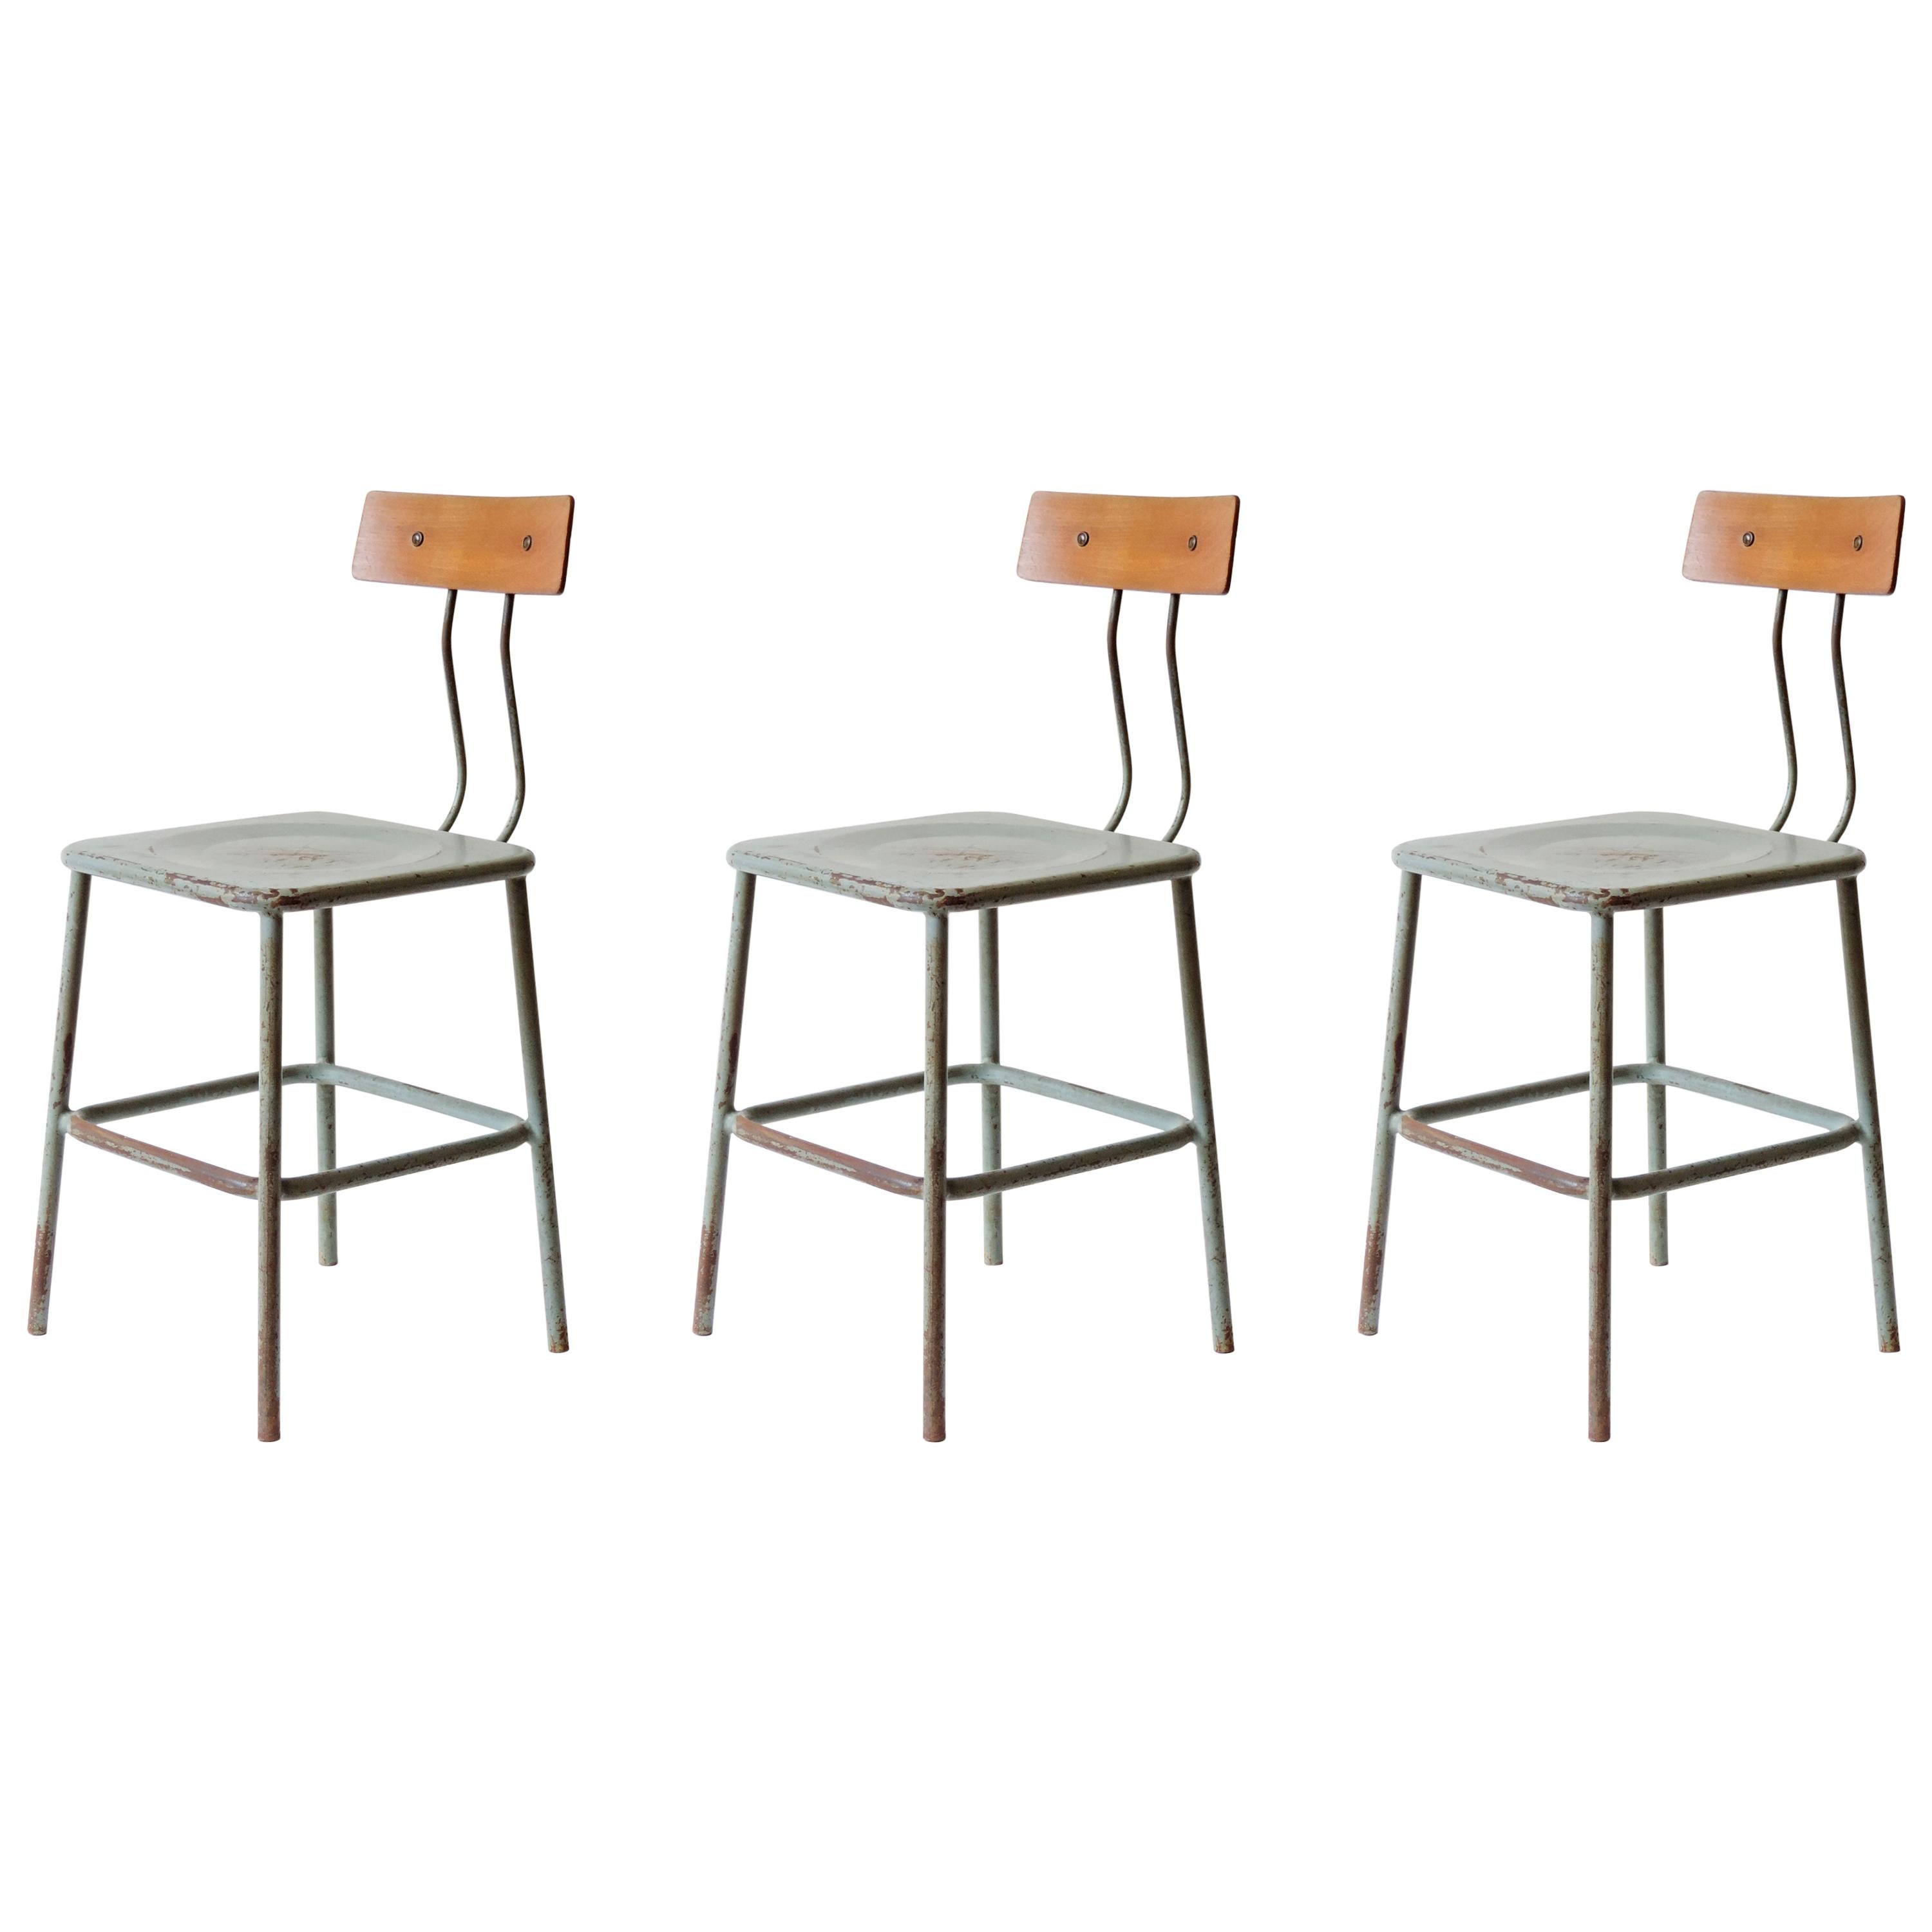 Set of Three Italian Industrial Chairs, Italy, 1950s For Sale